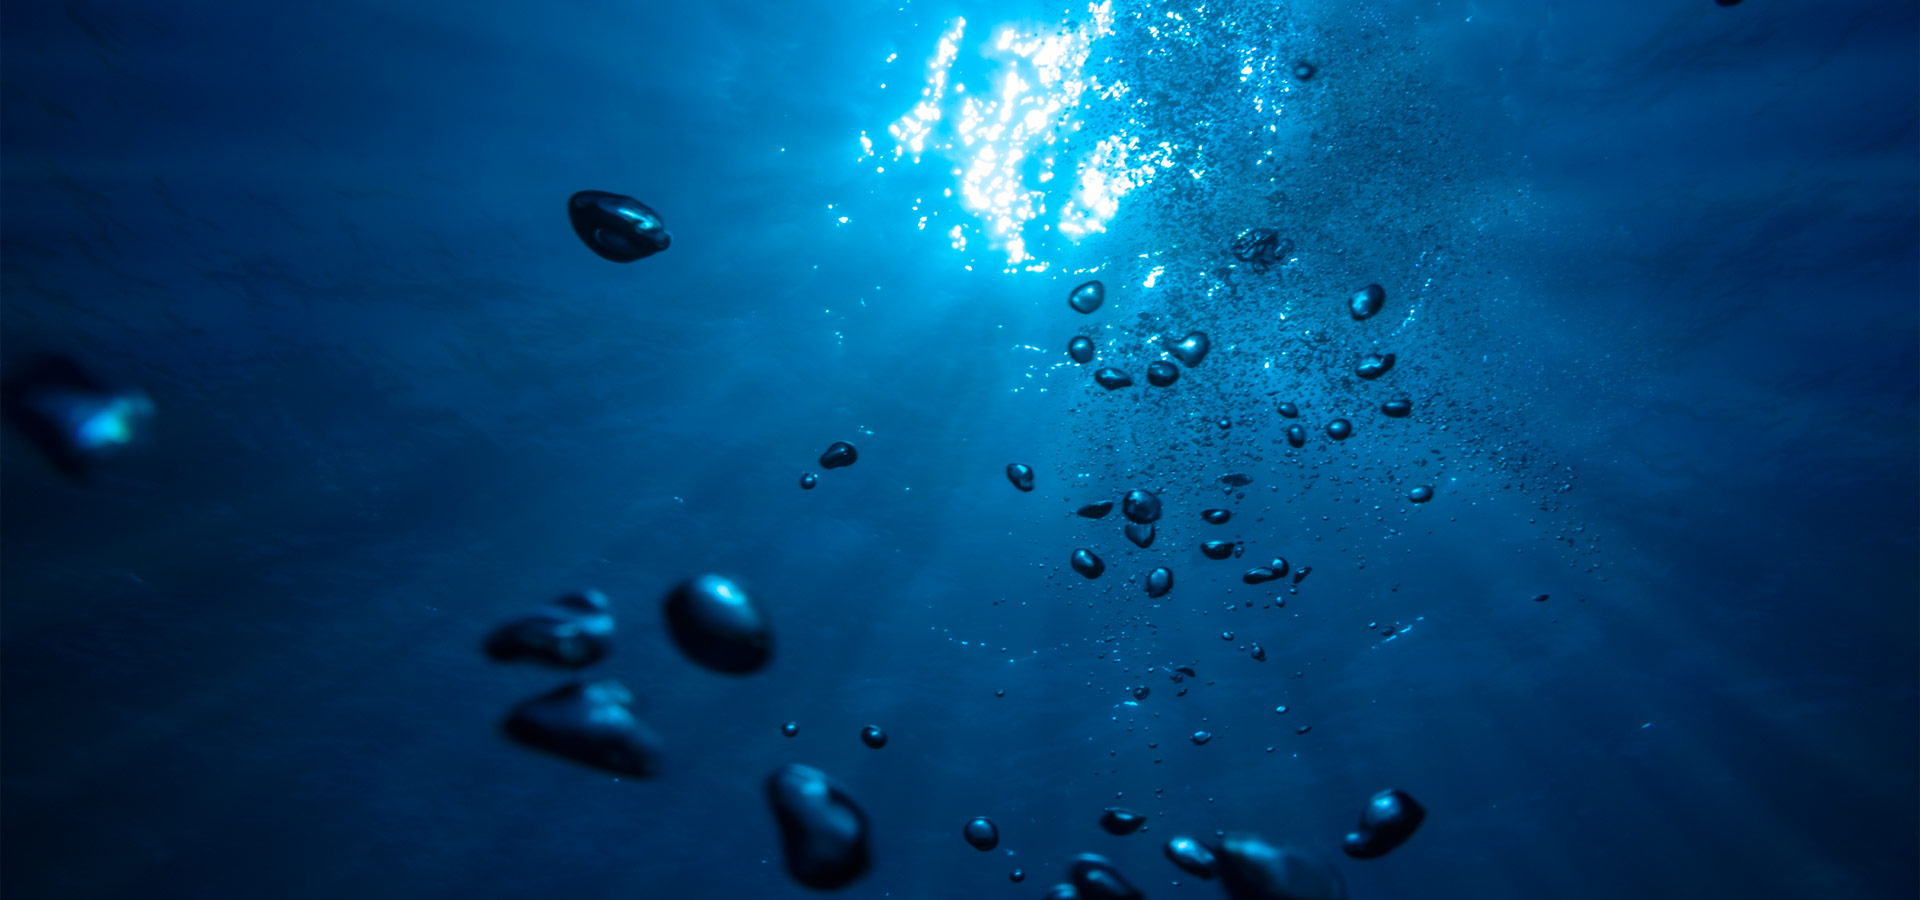 Deep Ocean - A guided meditation for total relaxation | Meditainment